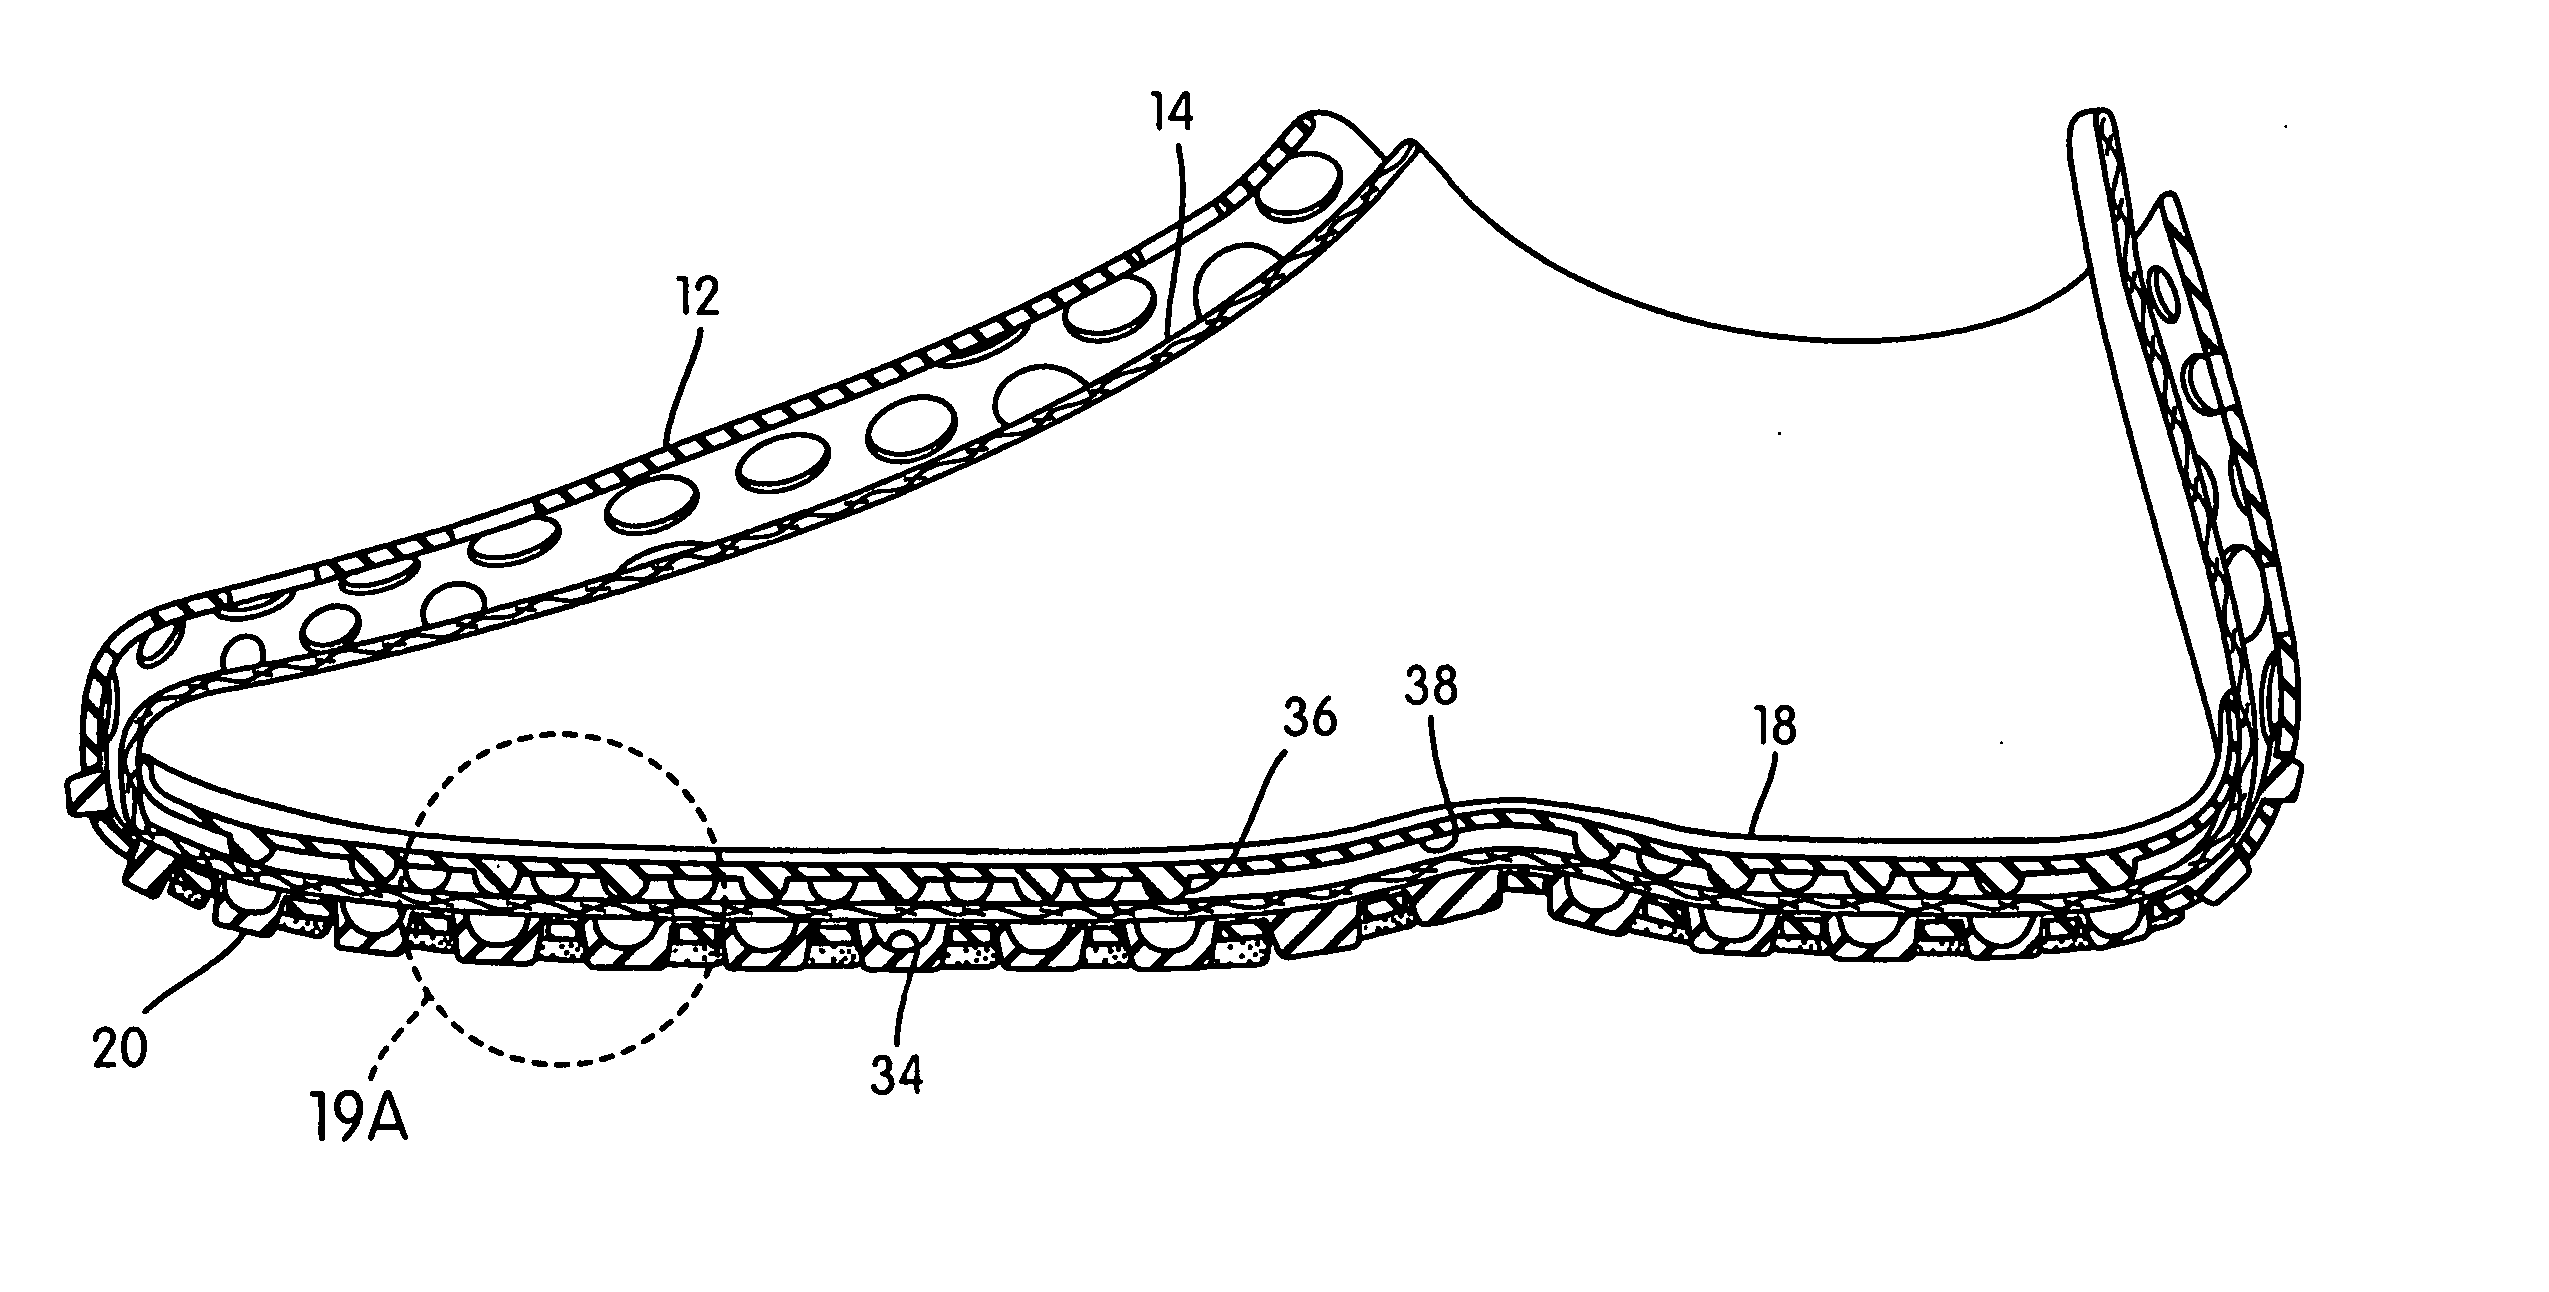 Article of footwear with perforated covering and removable components